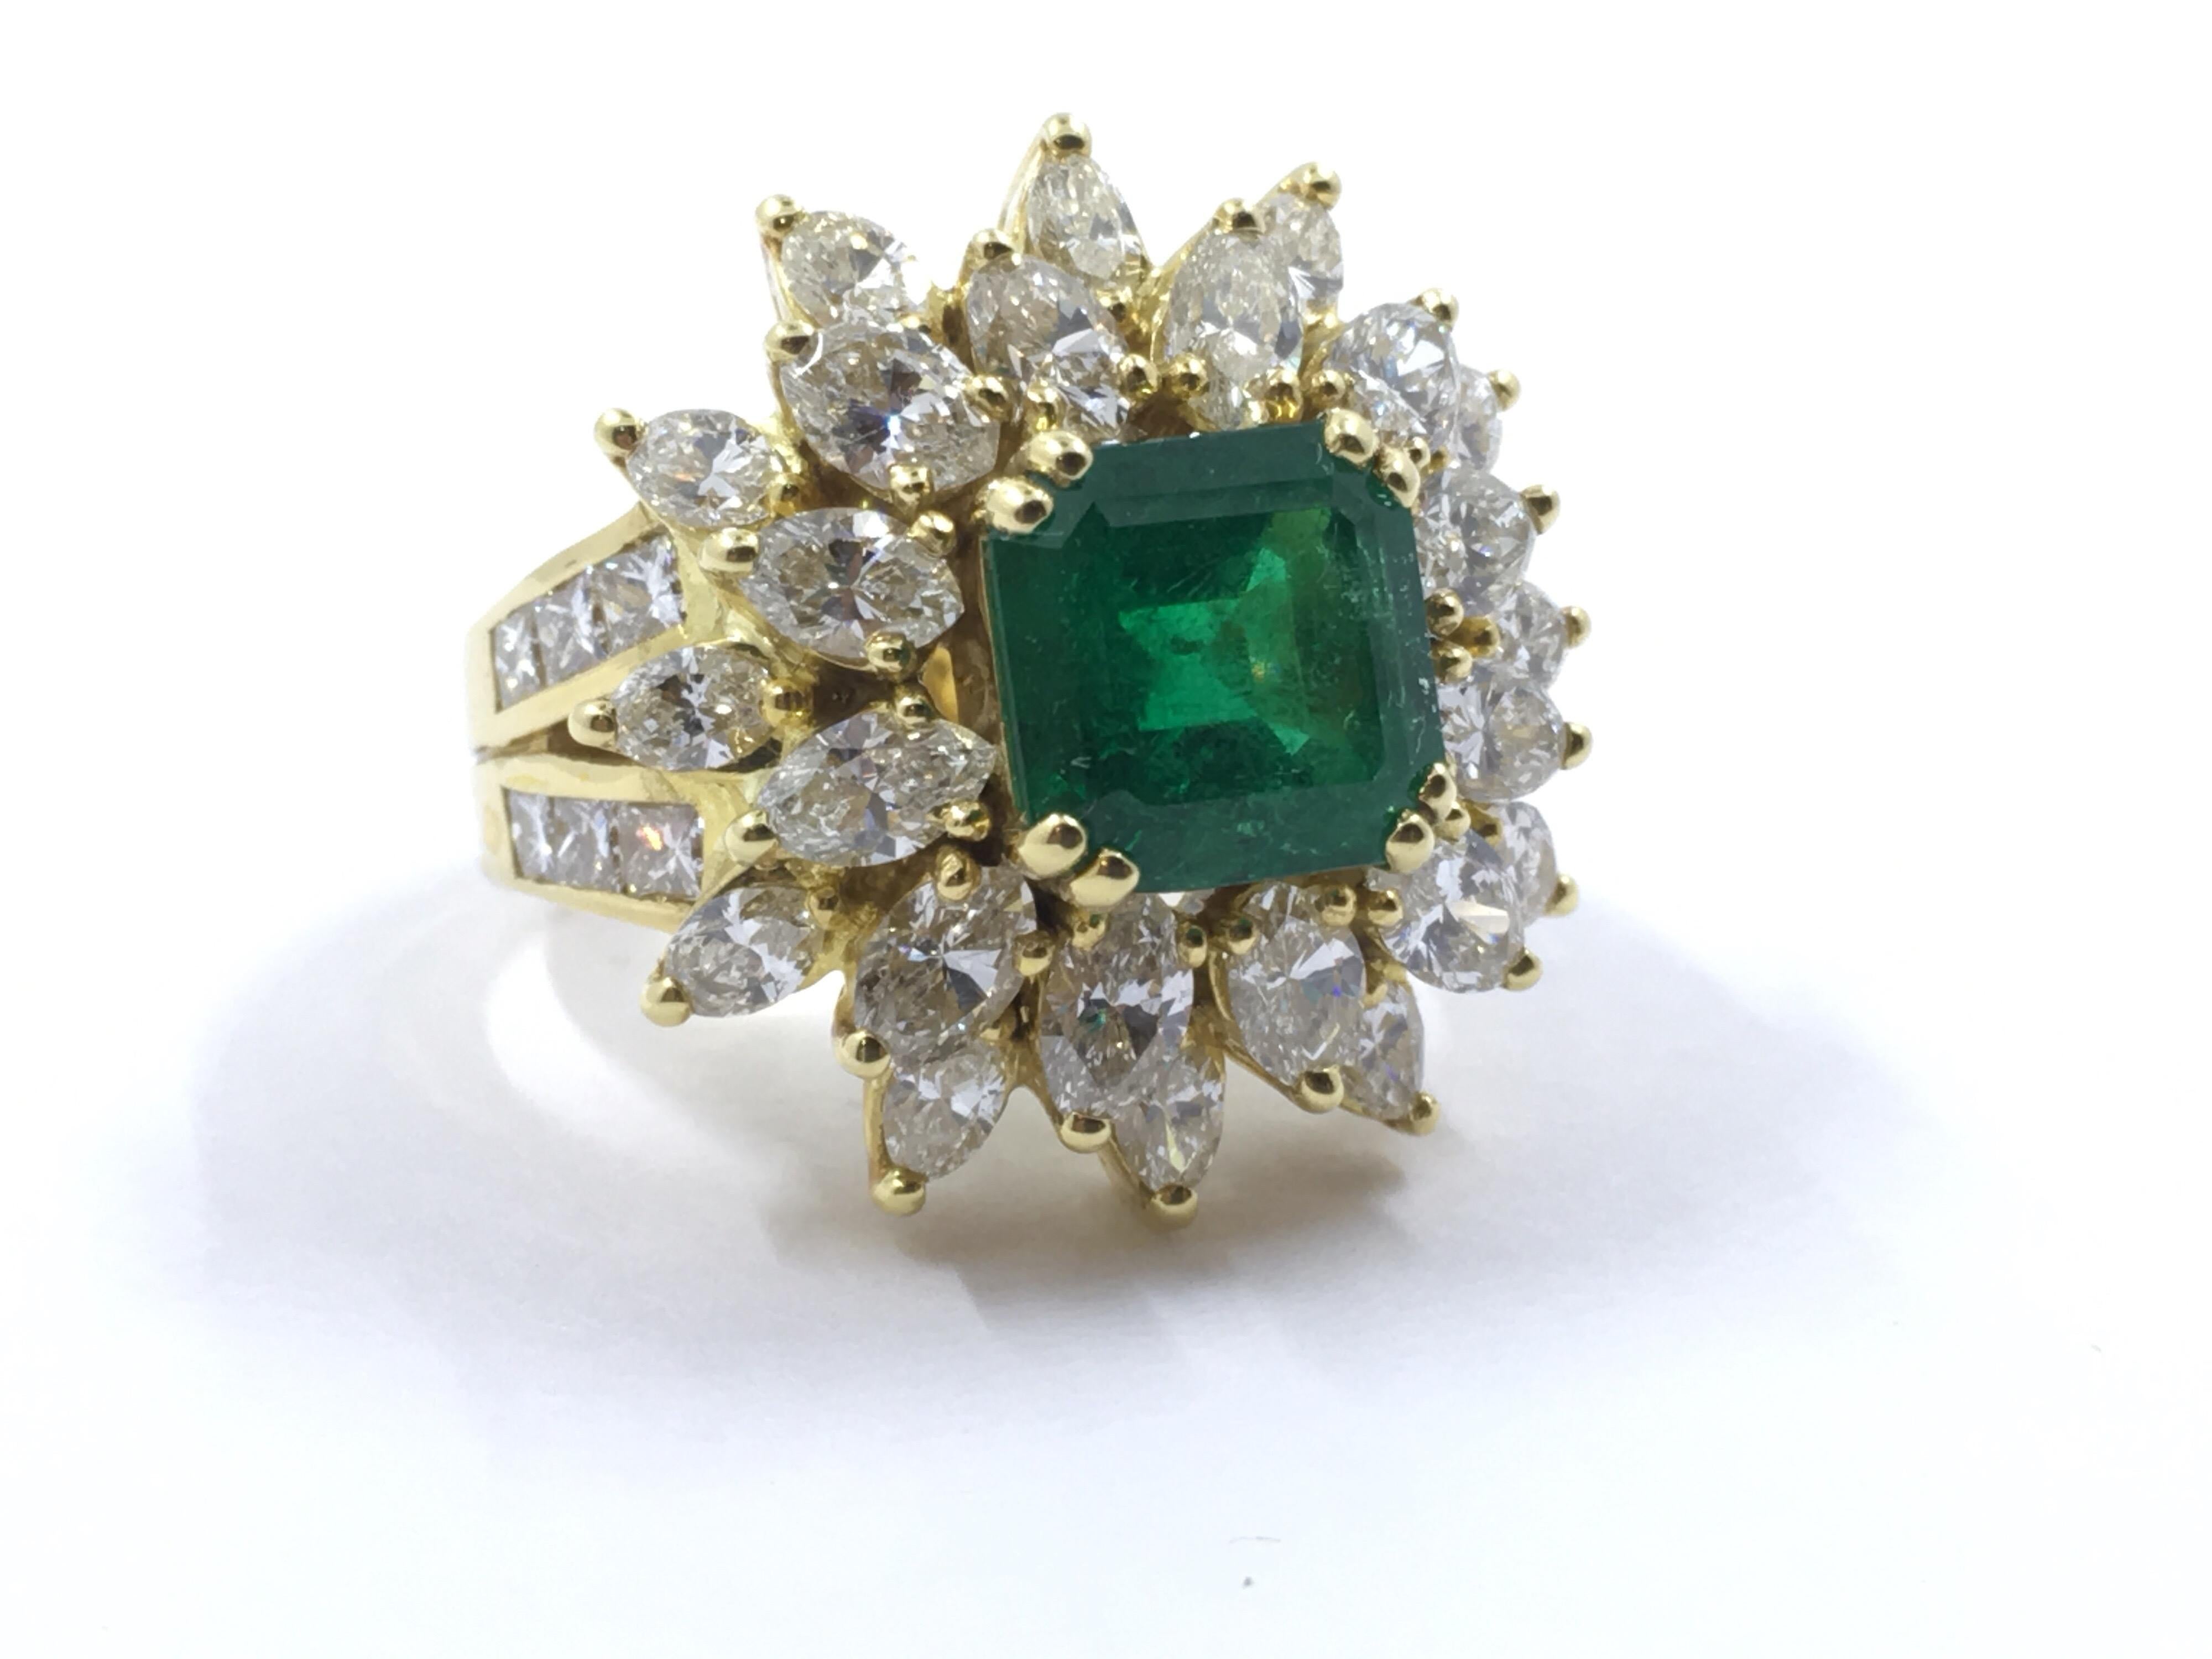 Natural Colombian Emerald  3.81 ct
Pear Shape Diamonds  2.43 ct
Marquis Diamonds 1.32 ct
Princess Cut Diamonds 0.84 ct
Set in 18 Kt Yellow Gold 